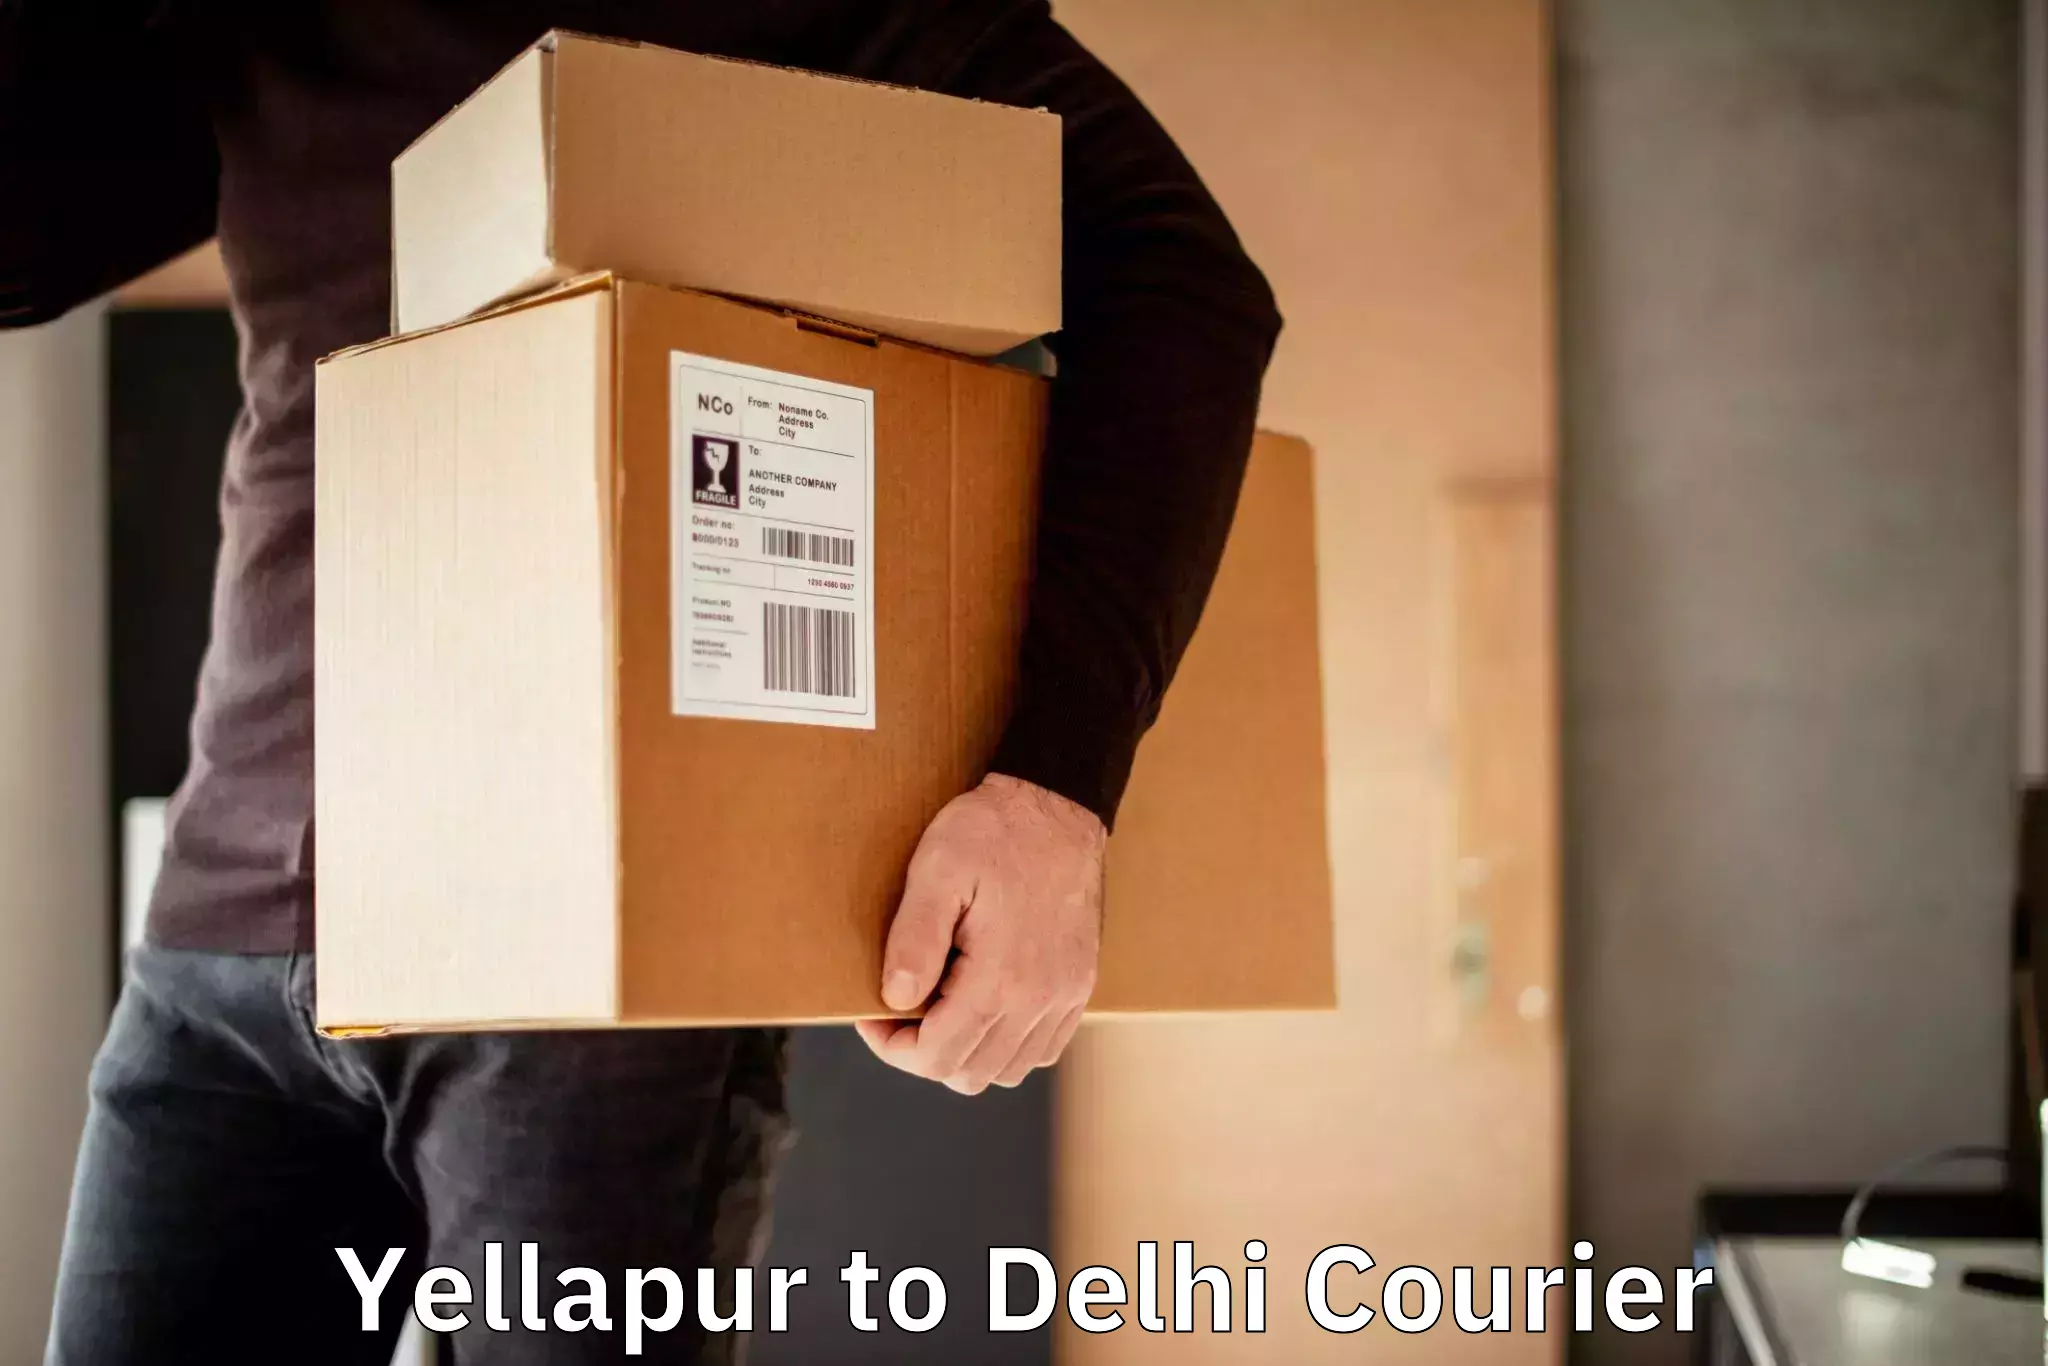 Automated parcel services Yellapur to Delhi